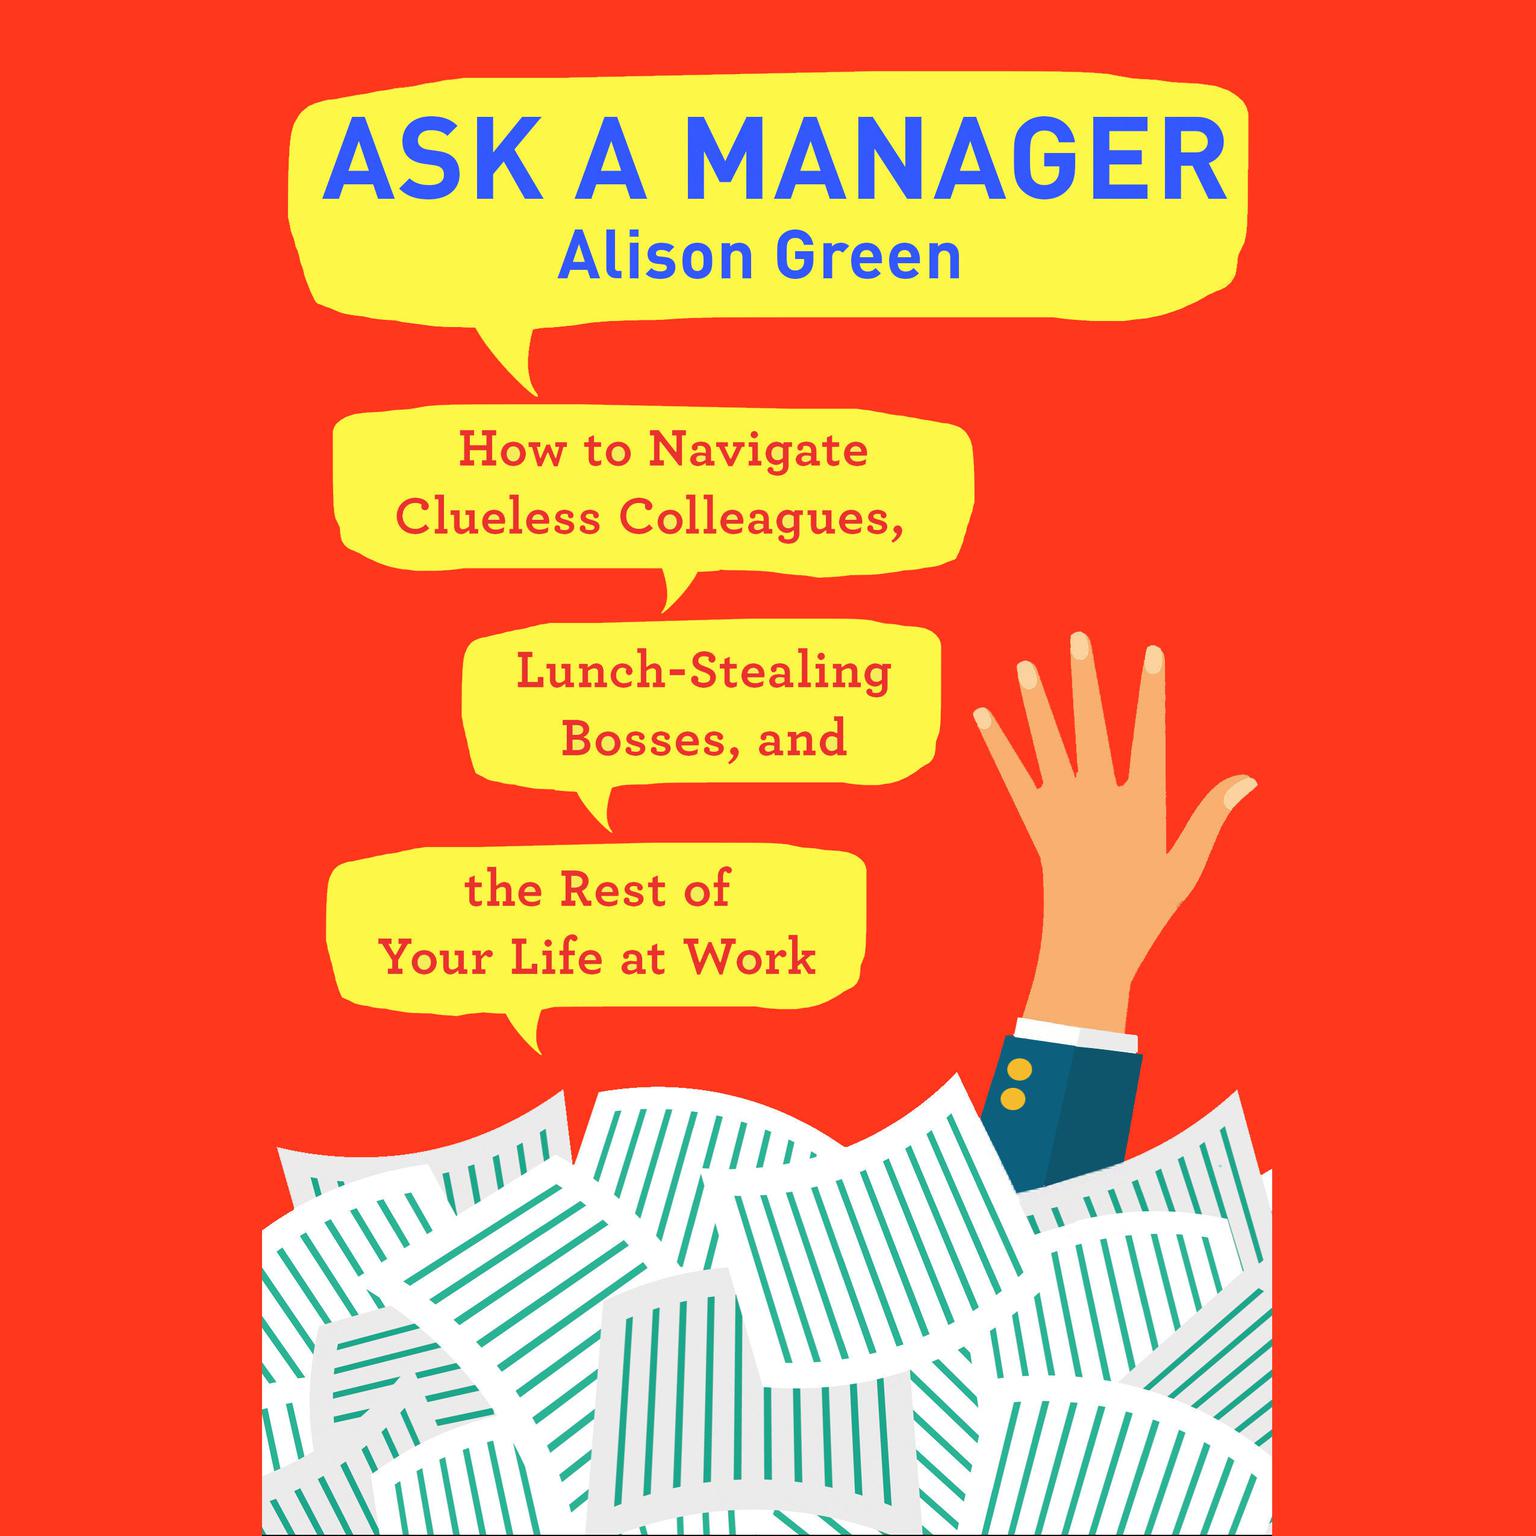 Ask a Manager: How to Navigate Clueless Colleagues, Lunch-Stealing Bosses, and the Rest of Your Life at Work Audiobook, by Alison Green